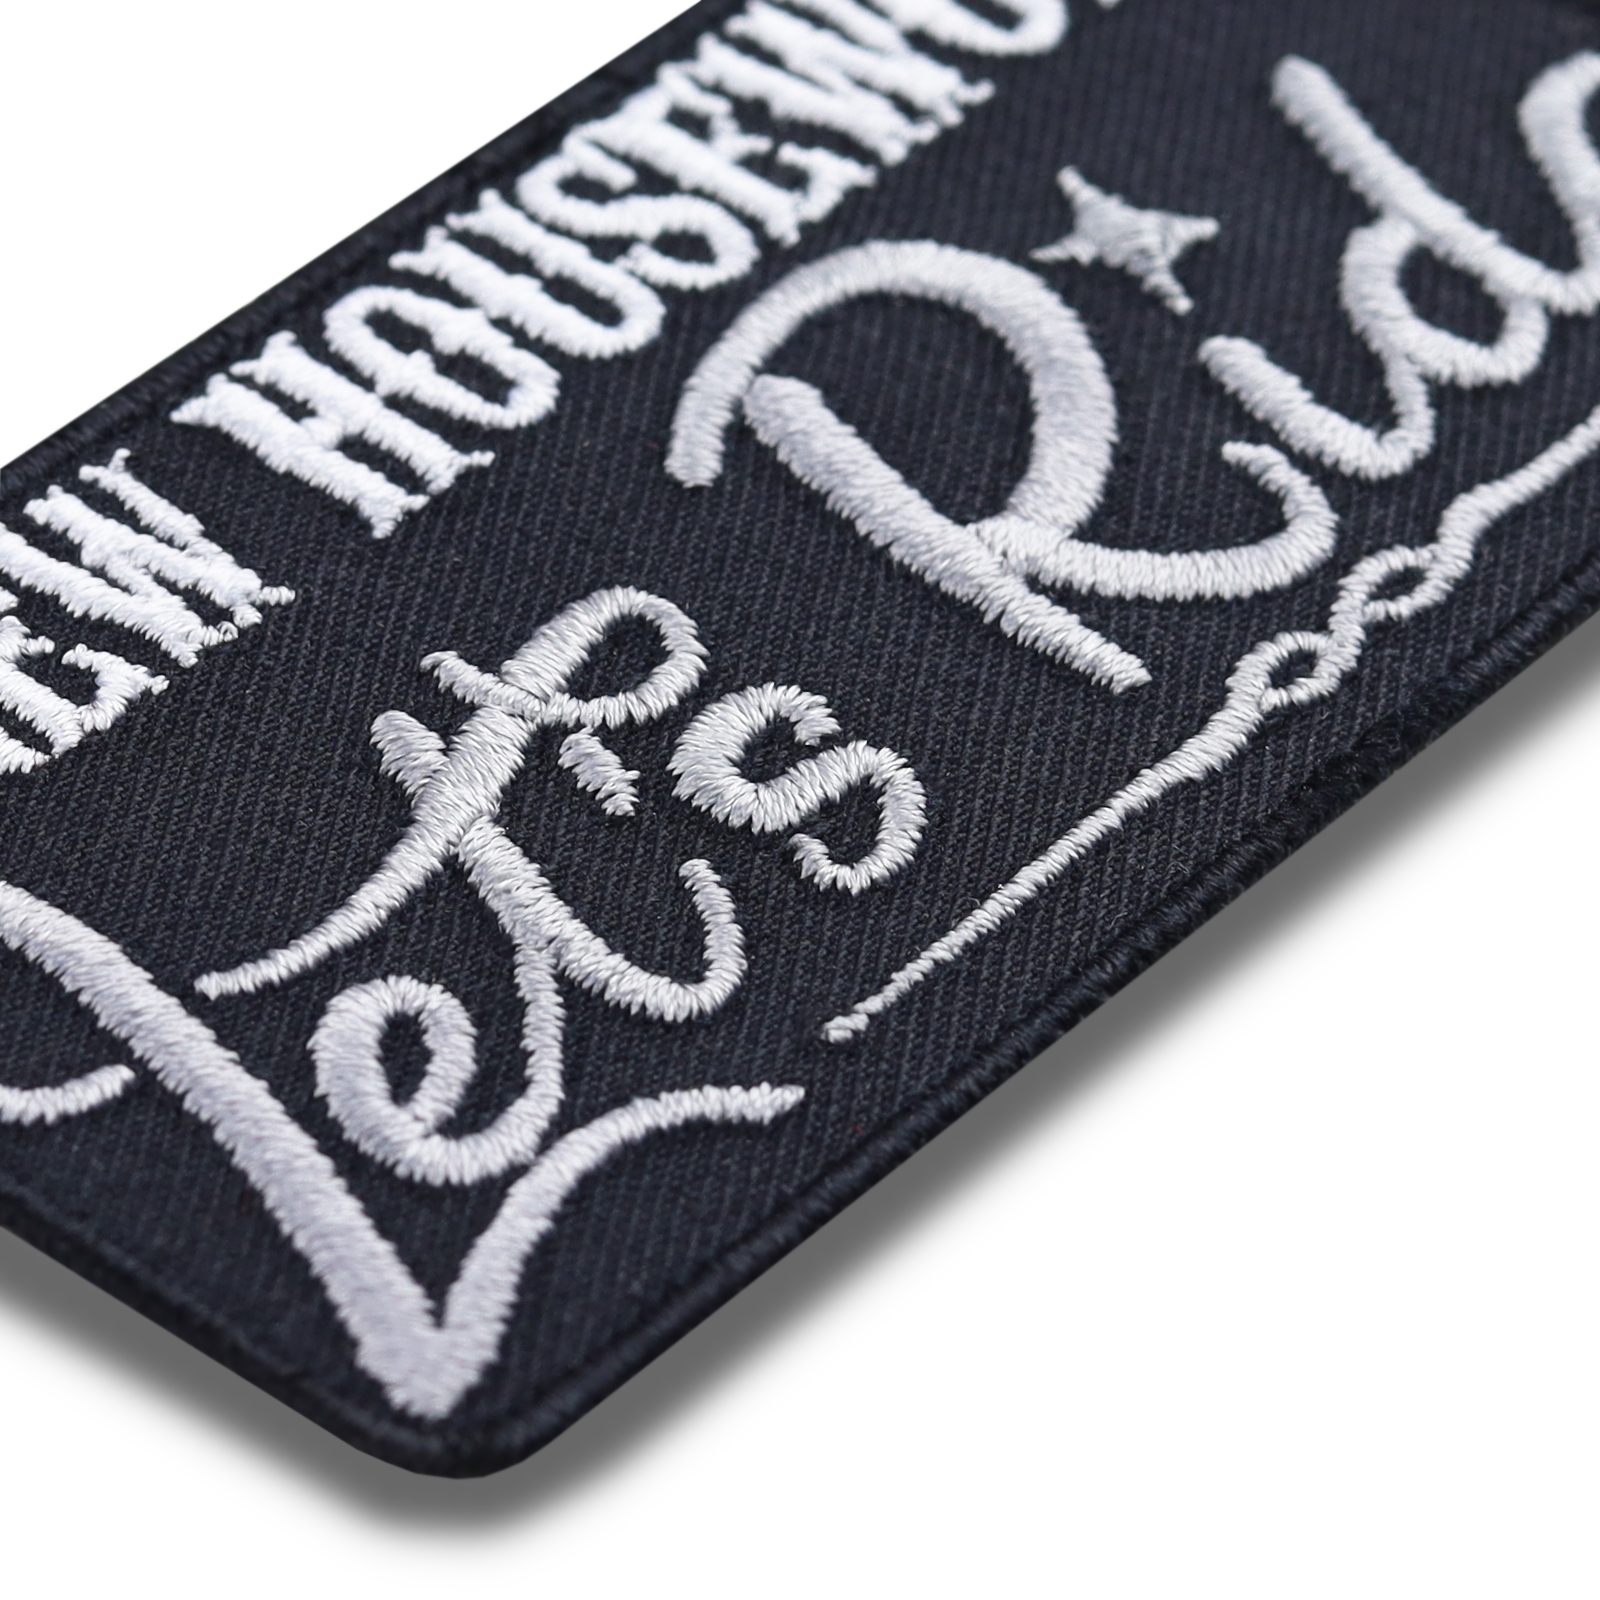 Screw Housework - Let's ride - Patch